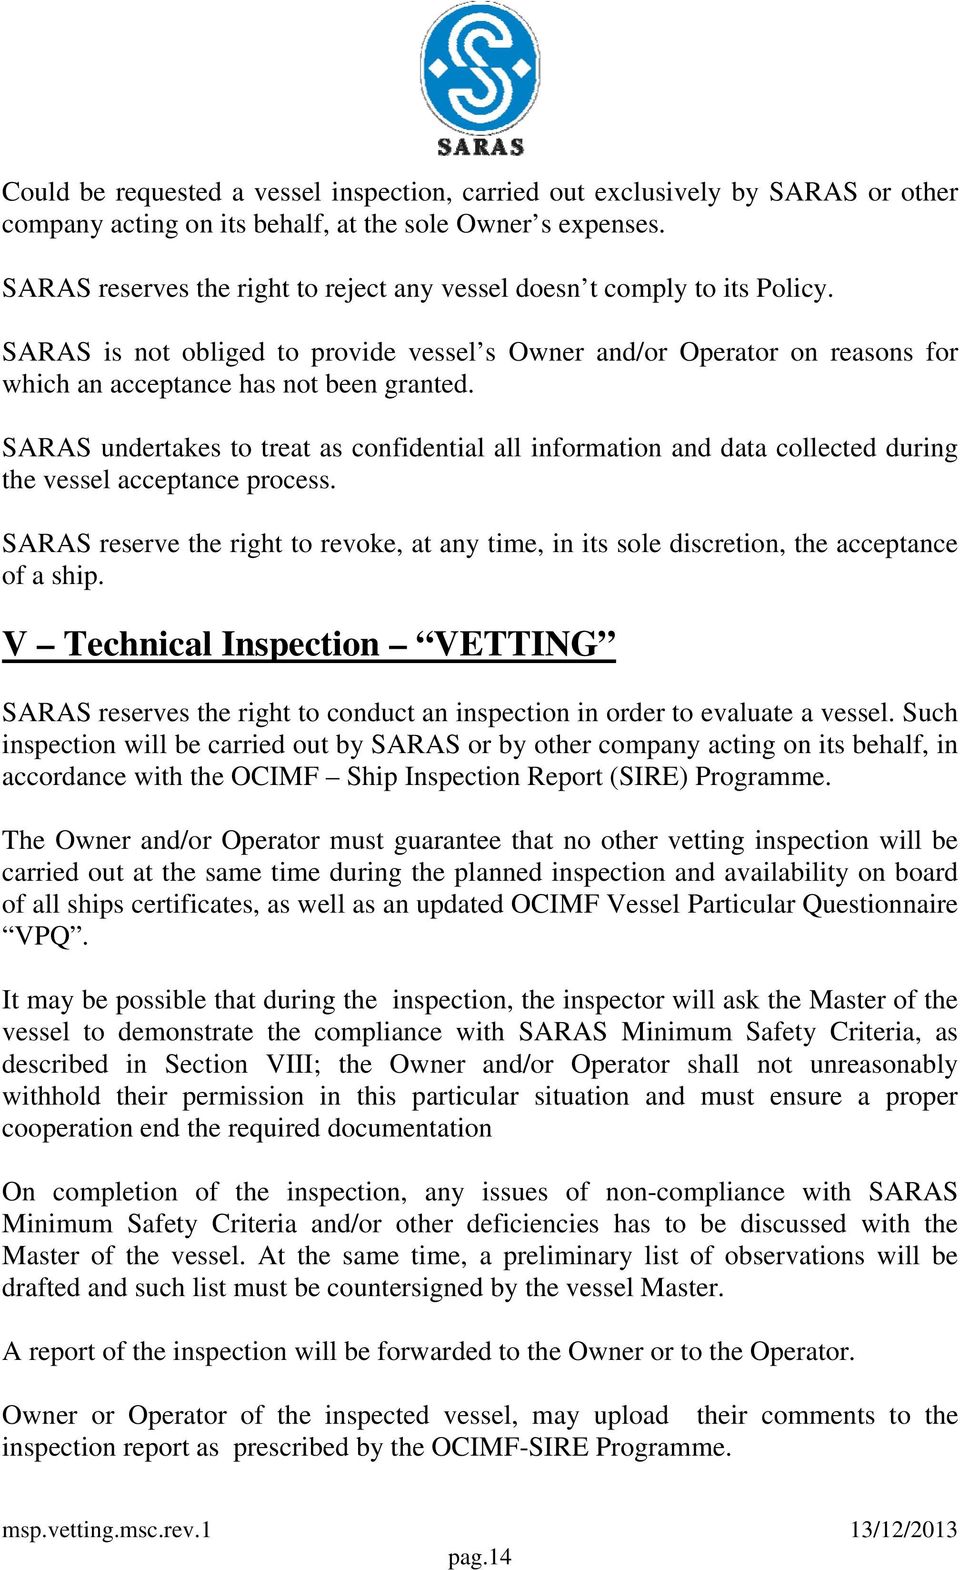 SARAS undertakes to treat as confidential all information and data collected during the vessel acceptance process.